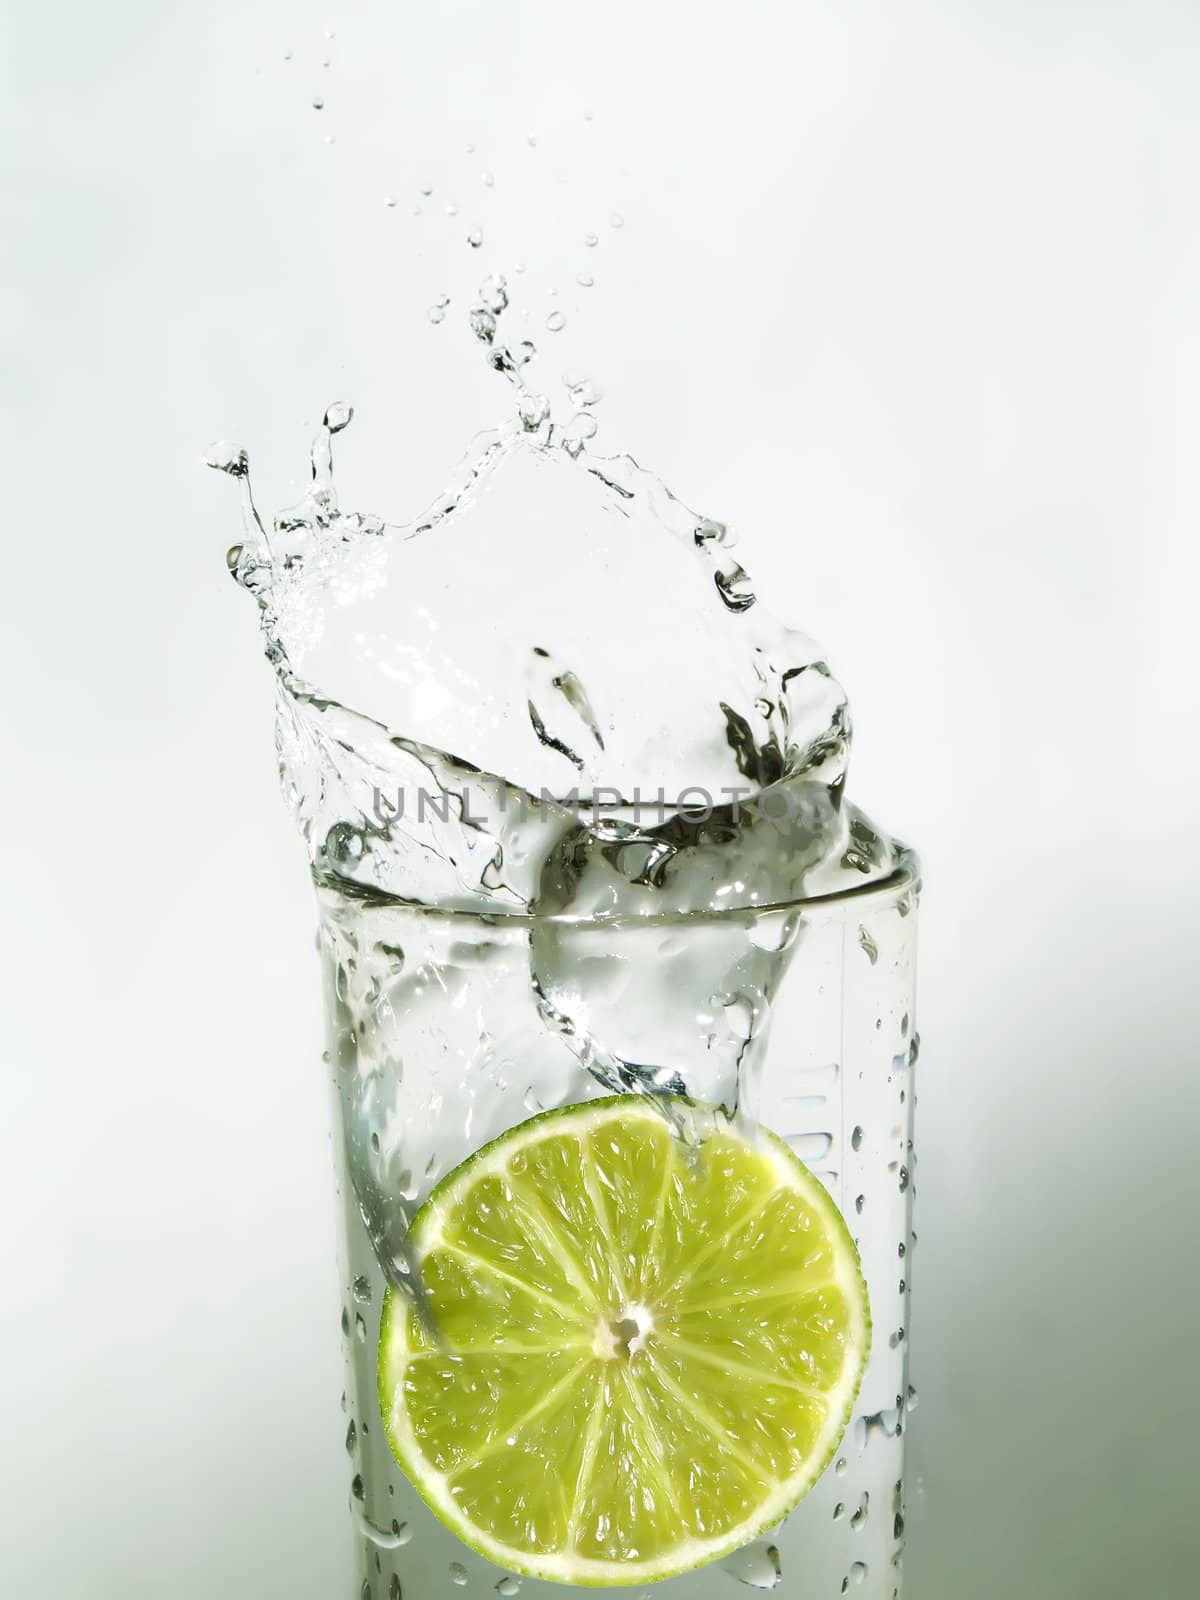 Lime slice in water by henrischmit